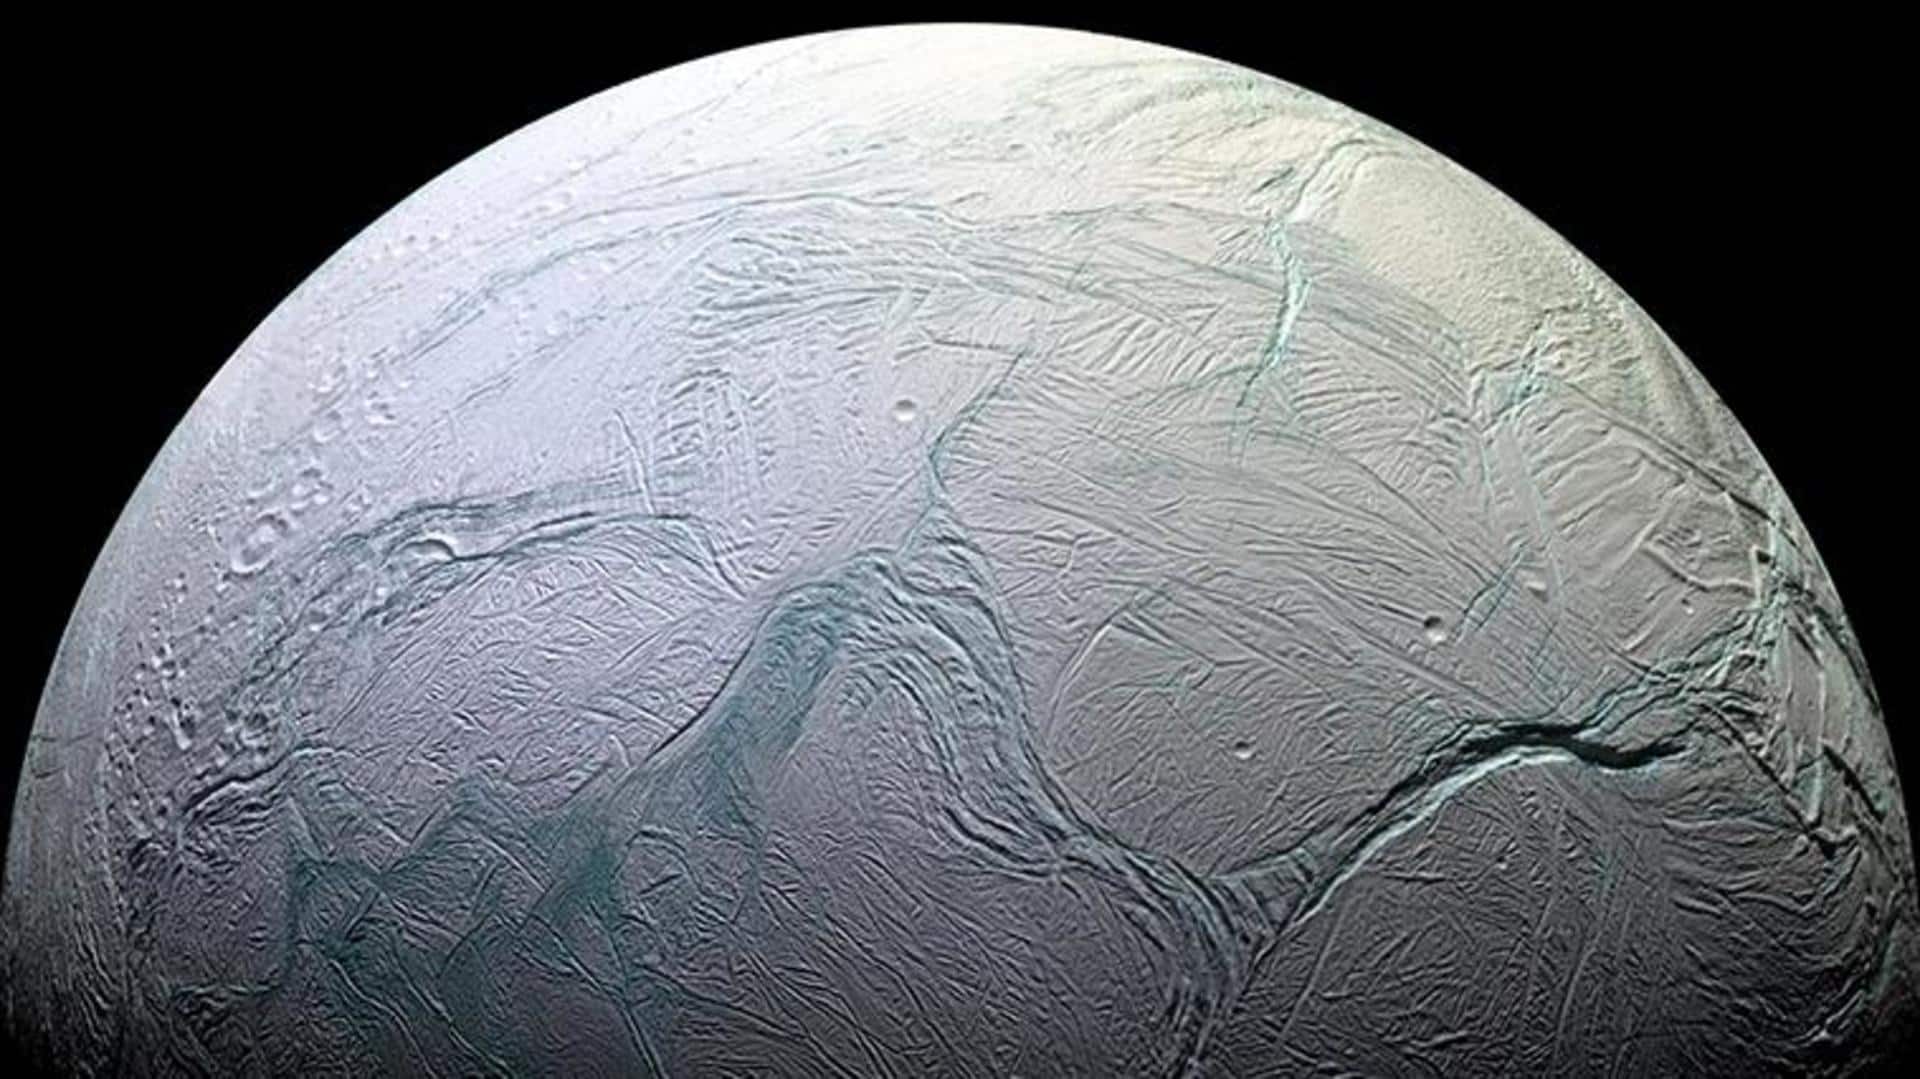 Scientists discover potential for life on Saturn's moon Enceladus